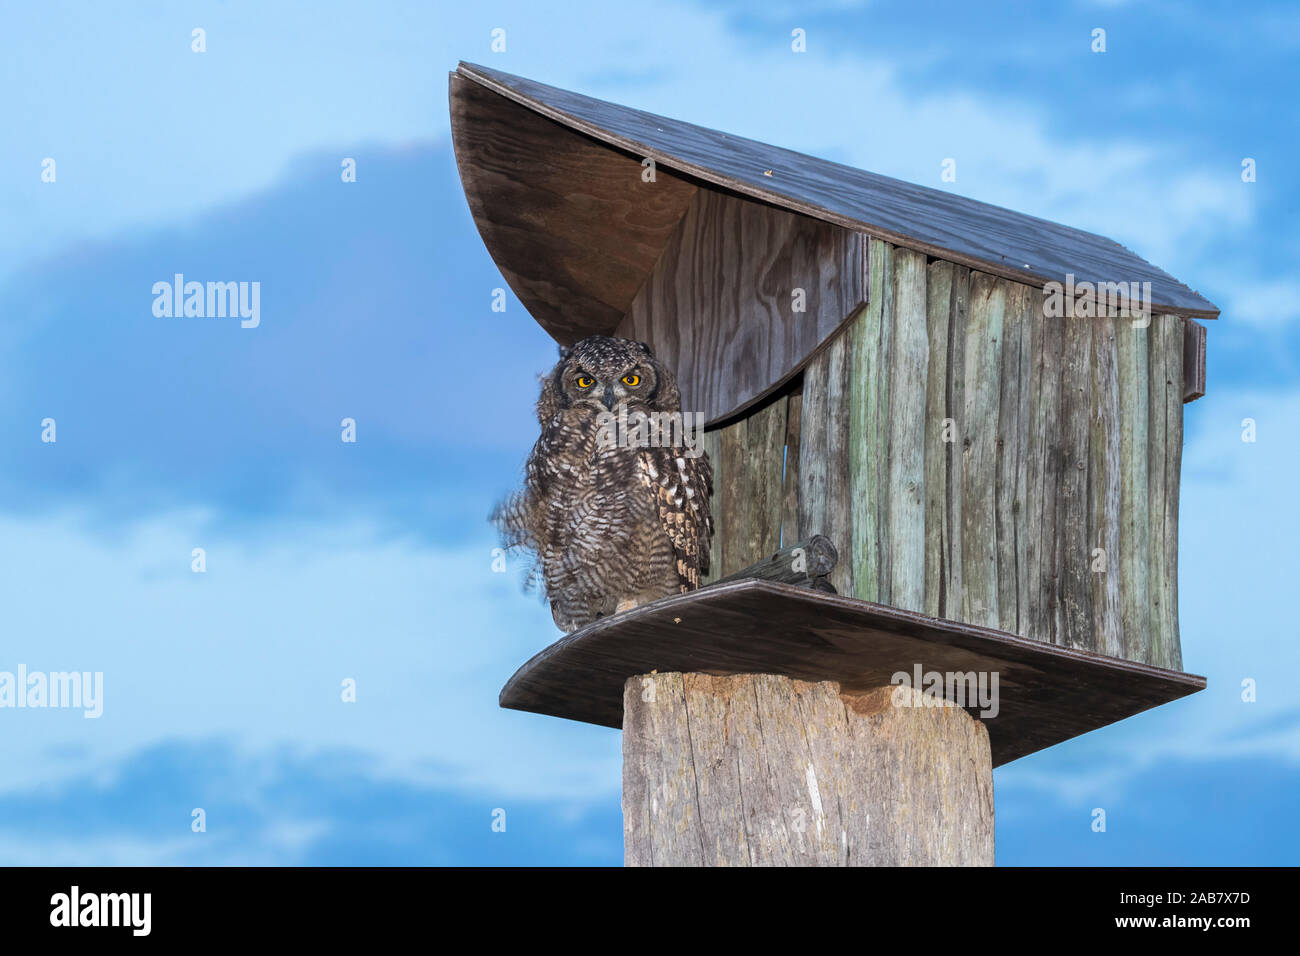 Spotted eagle owl (Bubo africanus) at nest box, Paternoster, Western Cape, South Africa, Africa Stock Photo